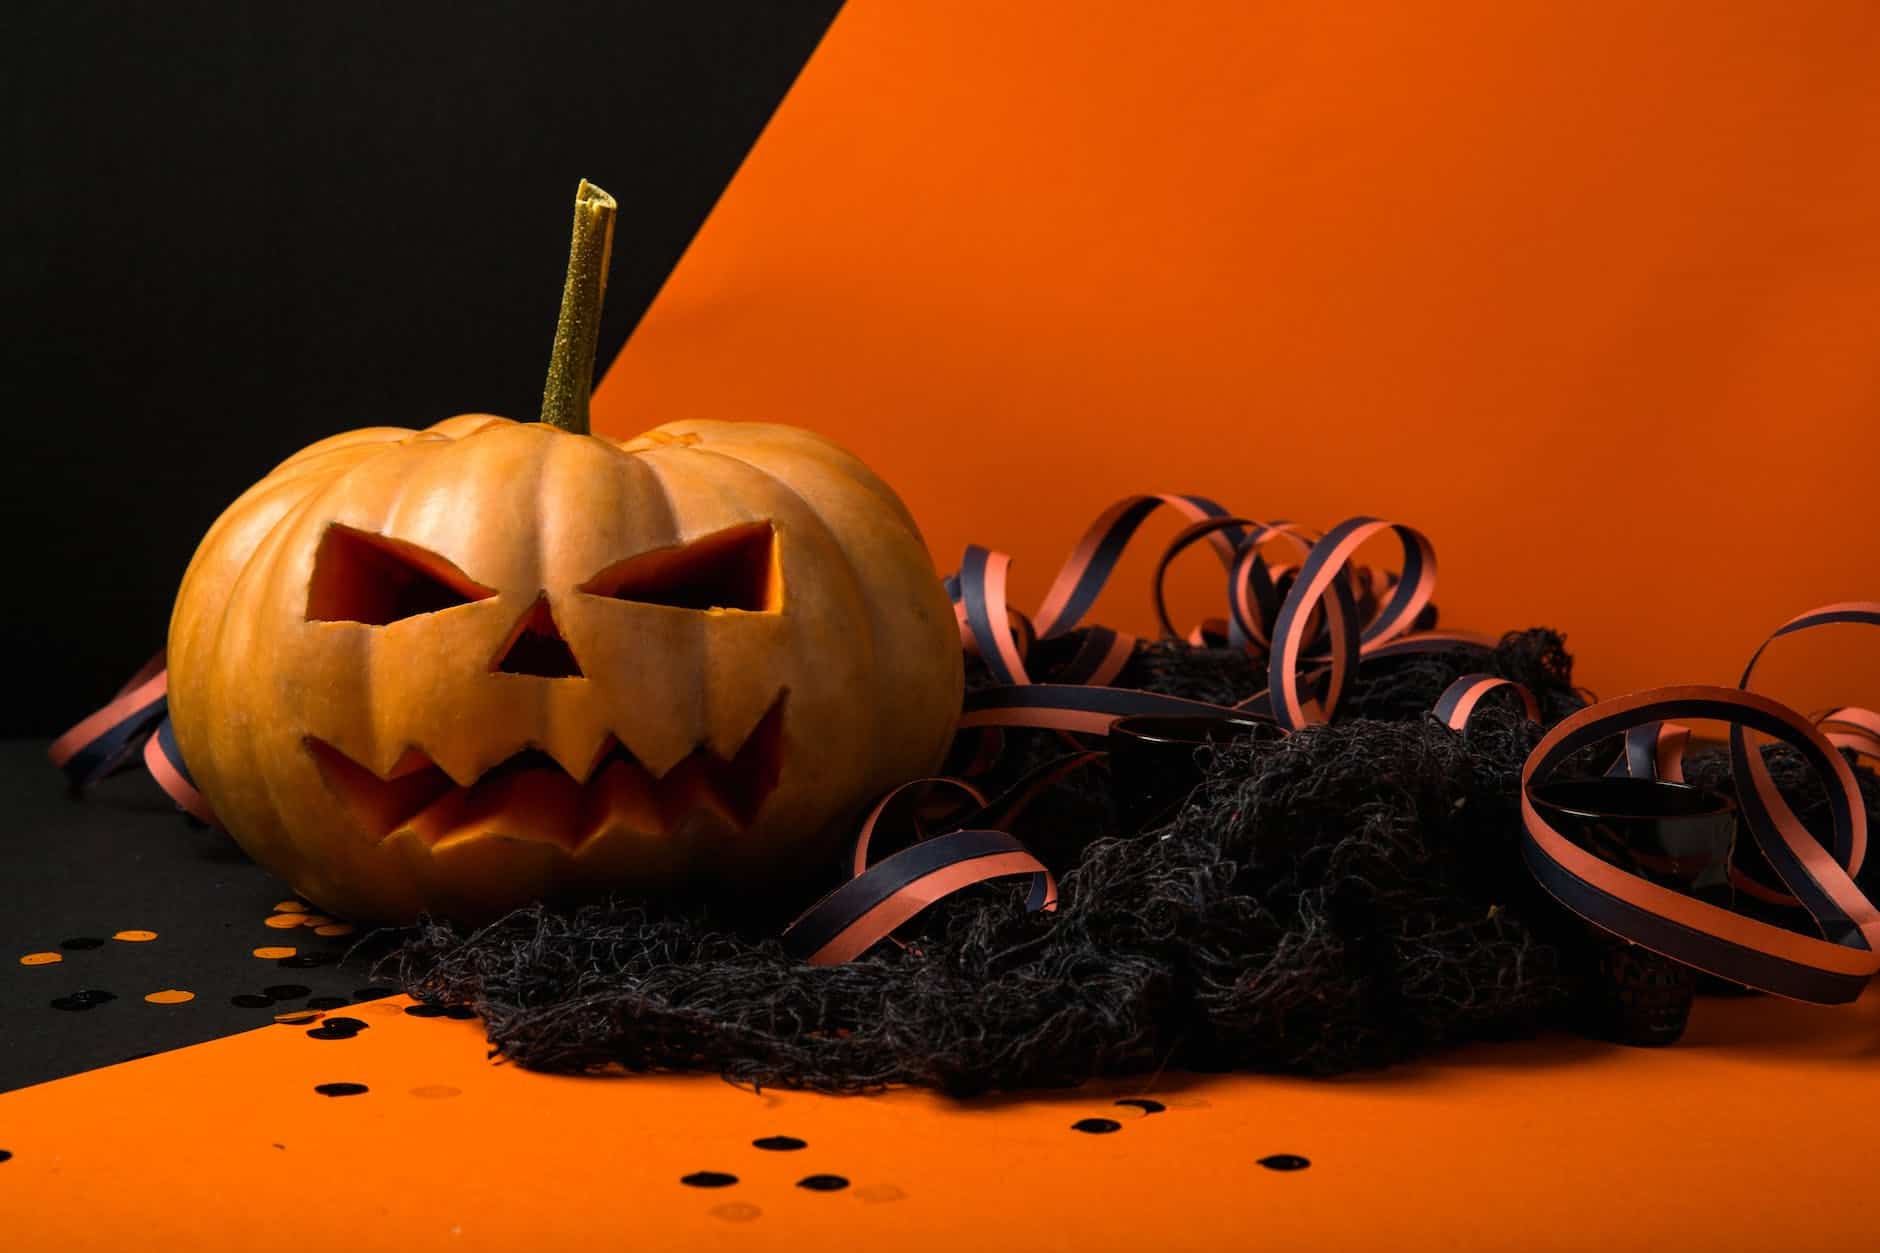 Spooktacular Halloween Decorations: Ideas to Haunt and Delight